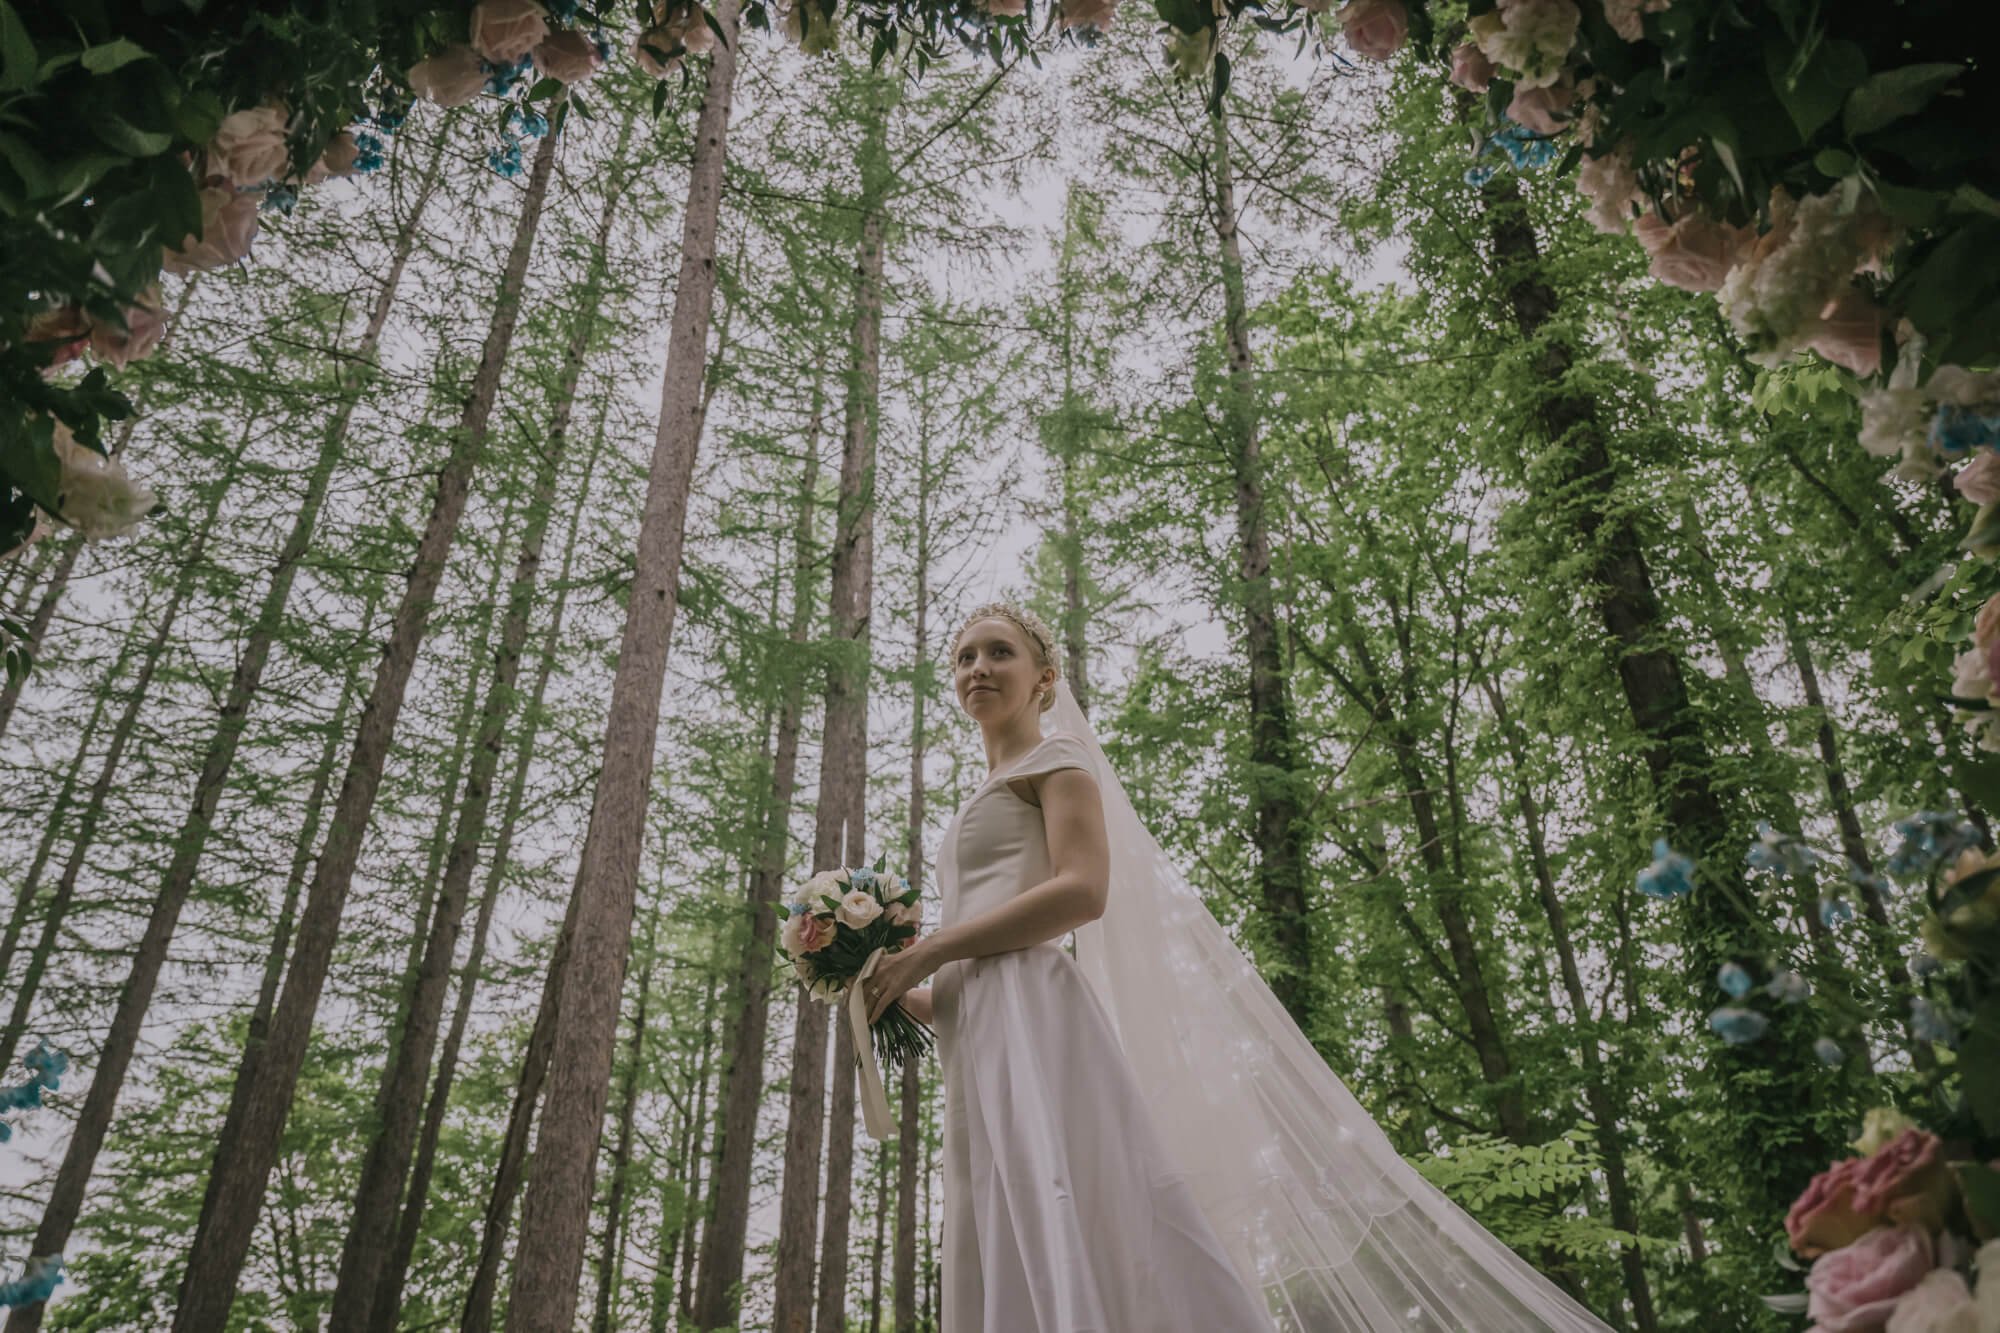 Bride in embroidered veil in front of tall trees